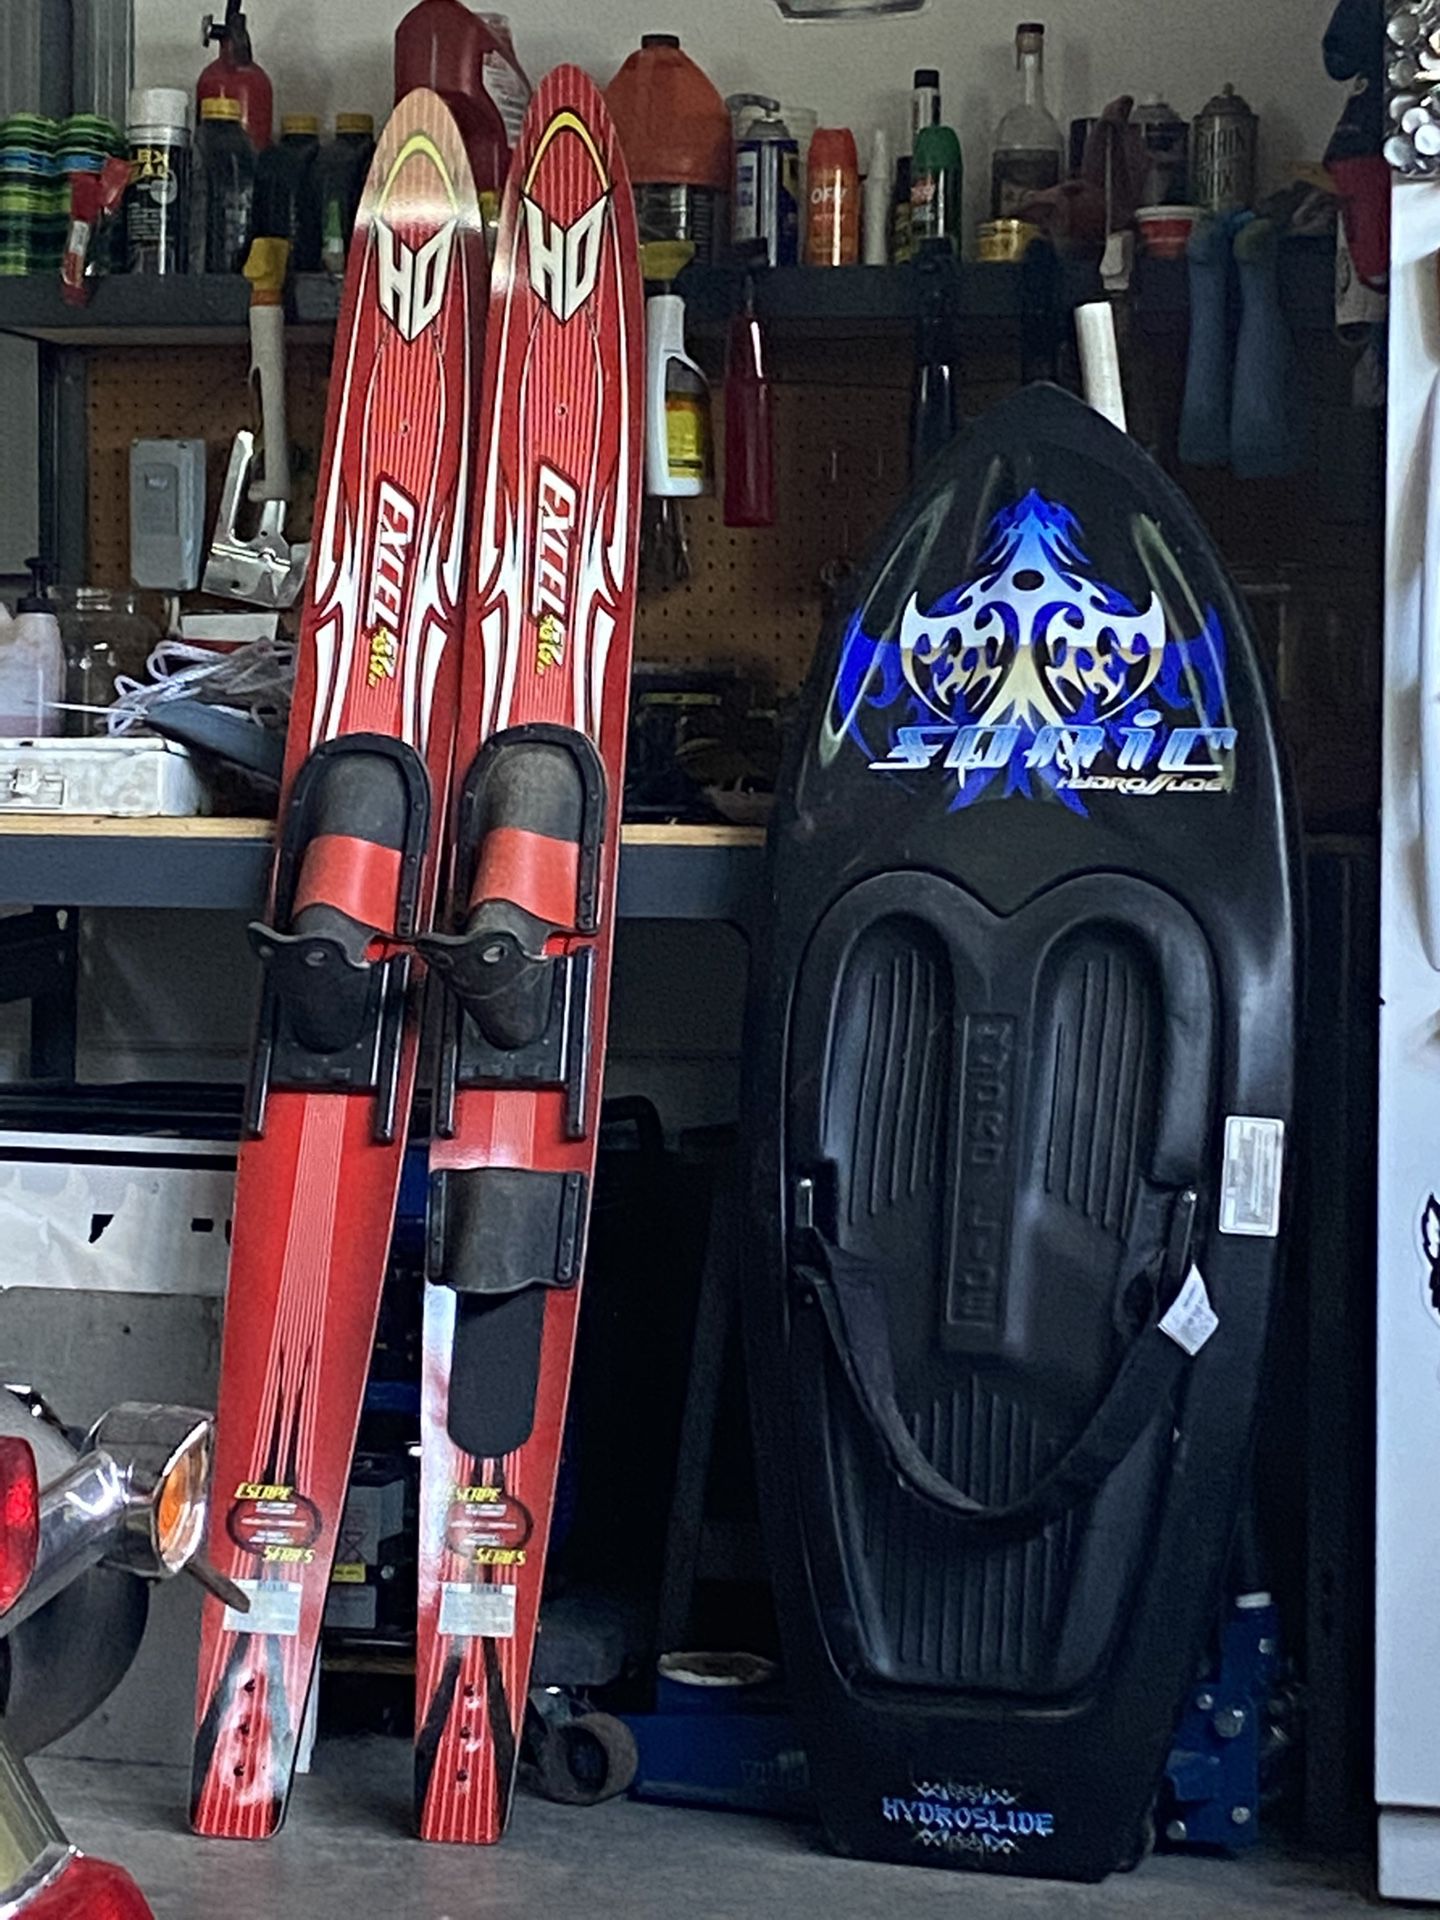 Skis and knee board